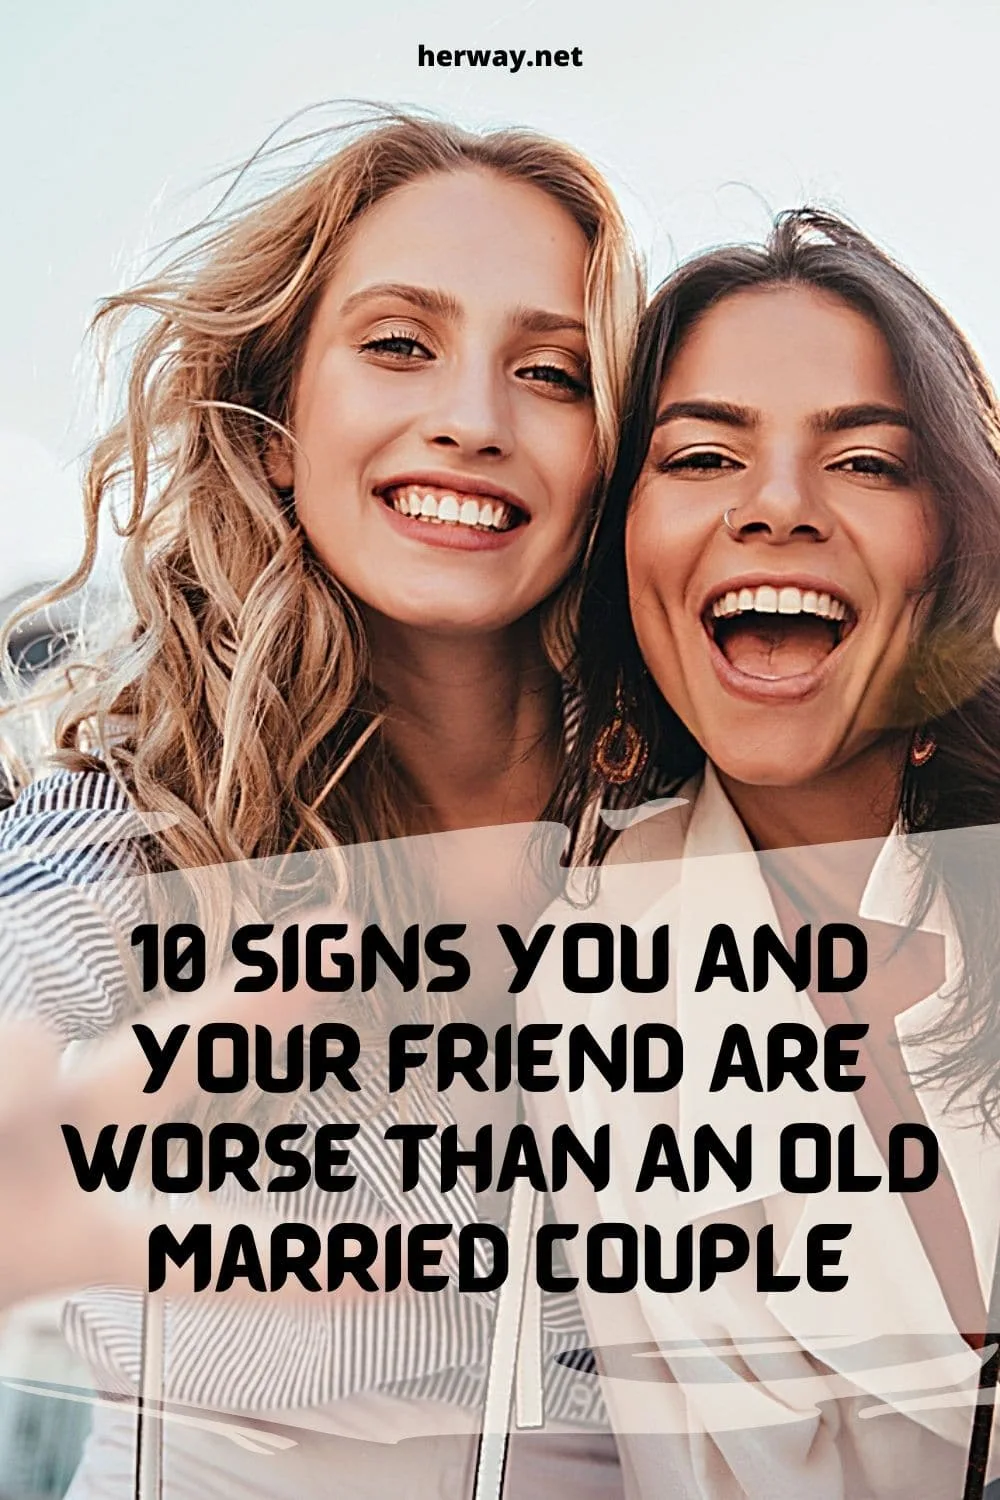 10 Signs You And Your Friend Are Worse Than An Old Married Couple